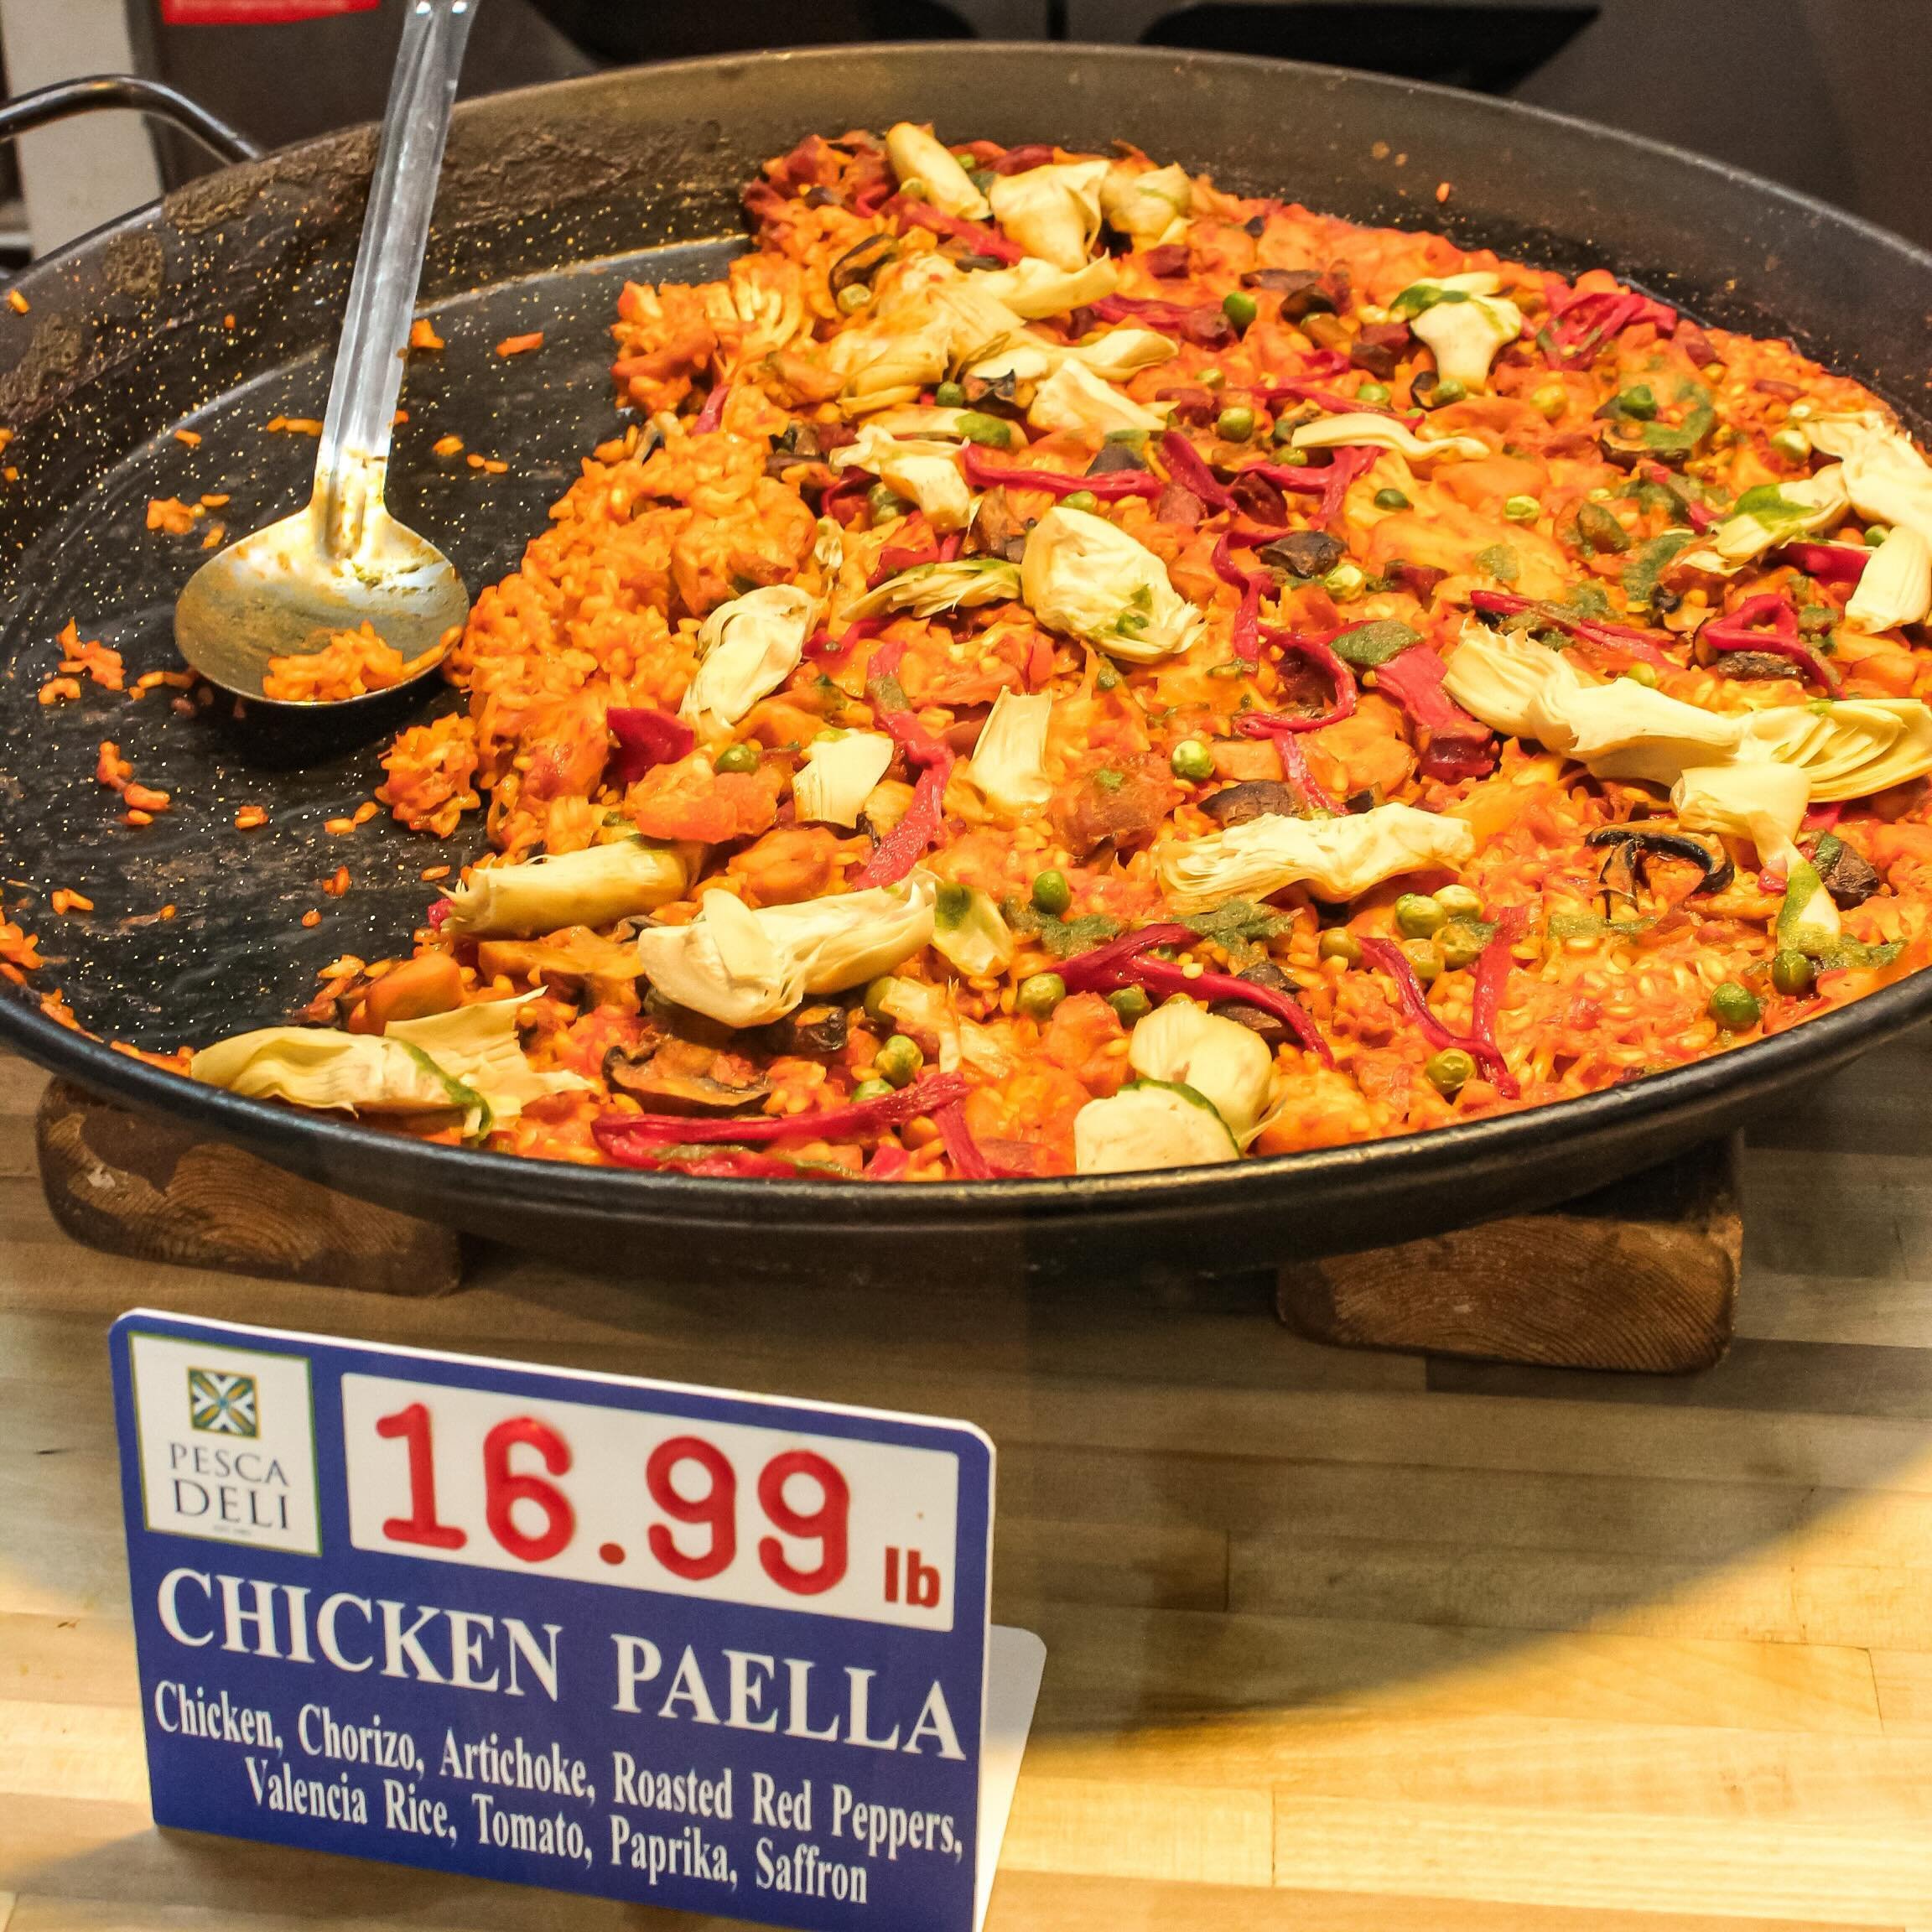 It&rsquo;s a good day to enjoy our paella by the pound. Made fresh daily in our kitchen and ready for you at noon. 

Which are you choosing - chicken or seafood paella?

#paella #bethesdamd